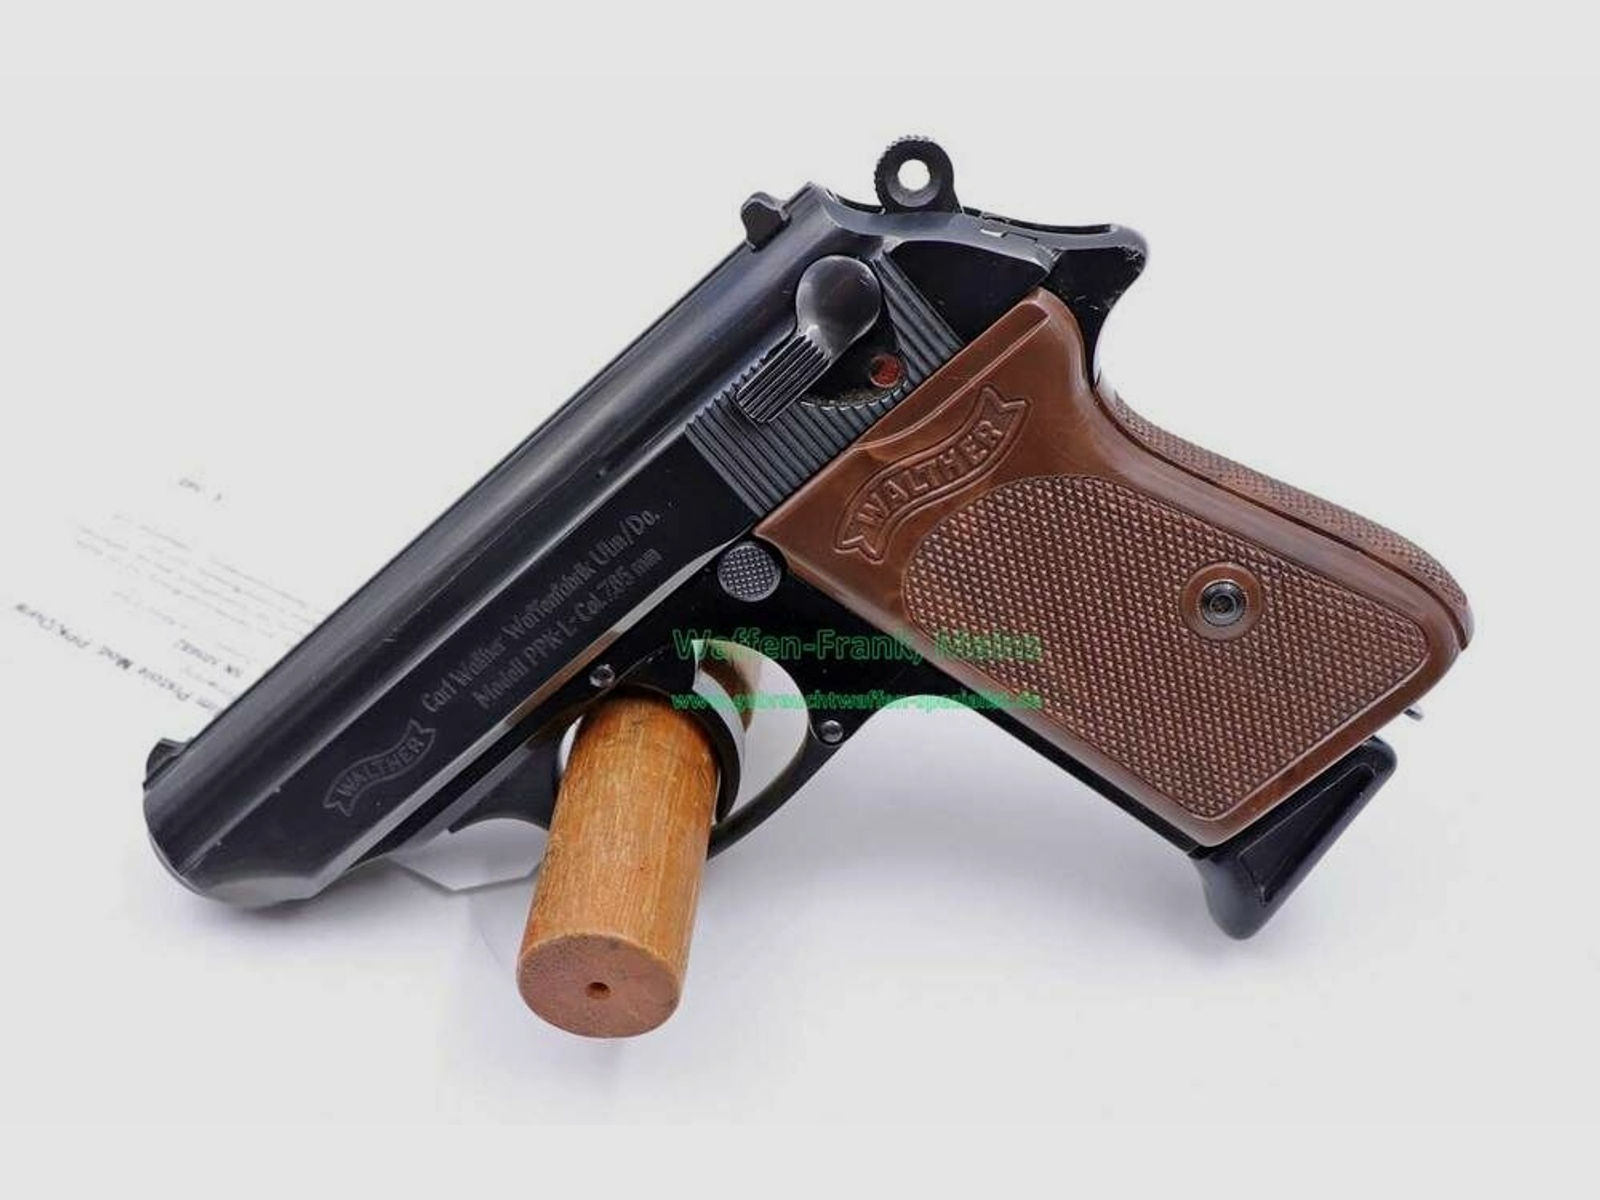 Walther - Ulm	 Pistole Mod. PPK/Dural